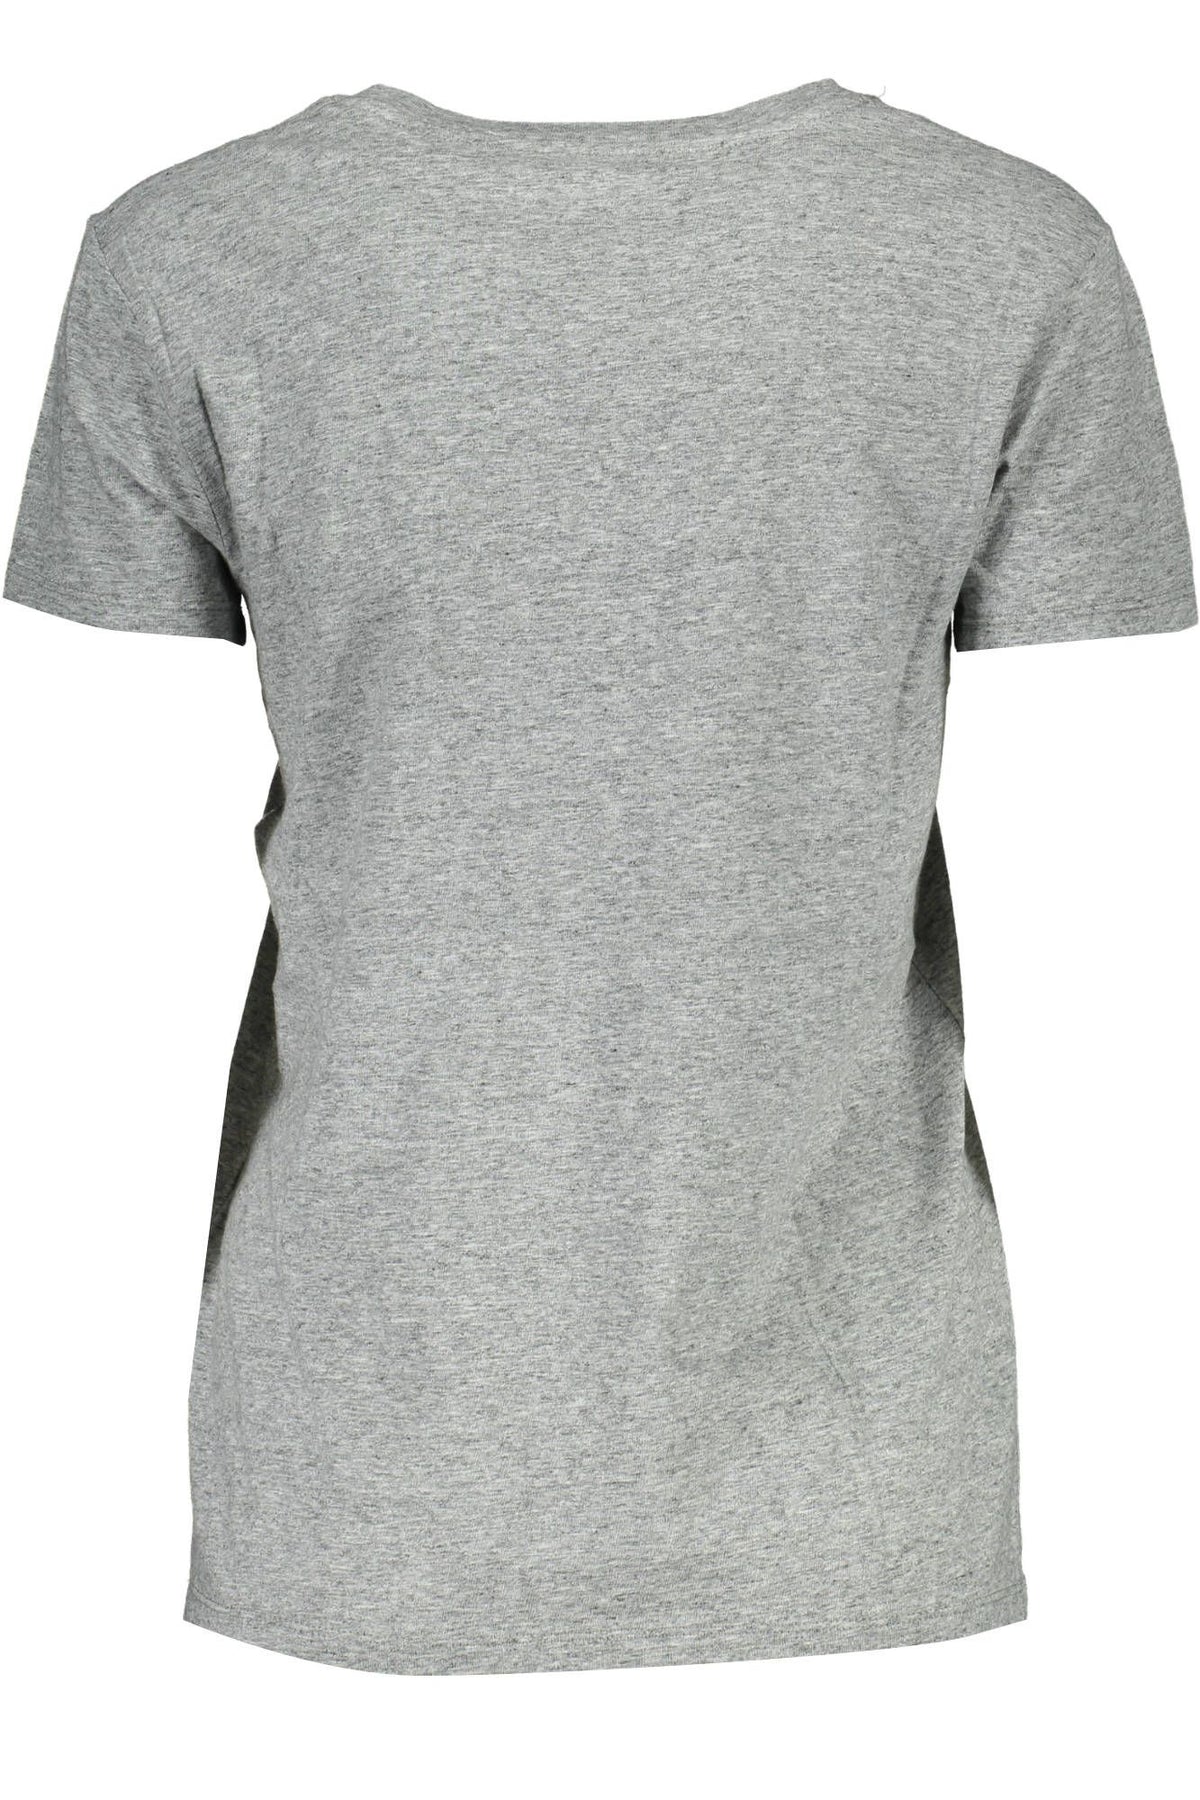 Levi's Chic Gray Printed Logo Cotton Tee for Women